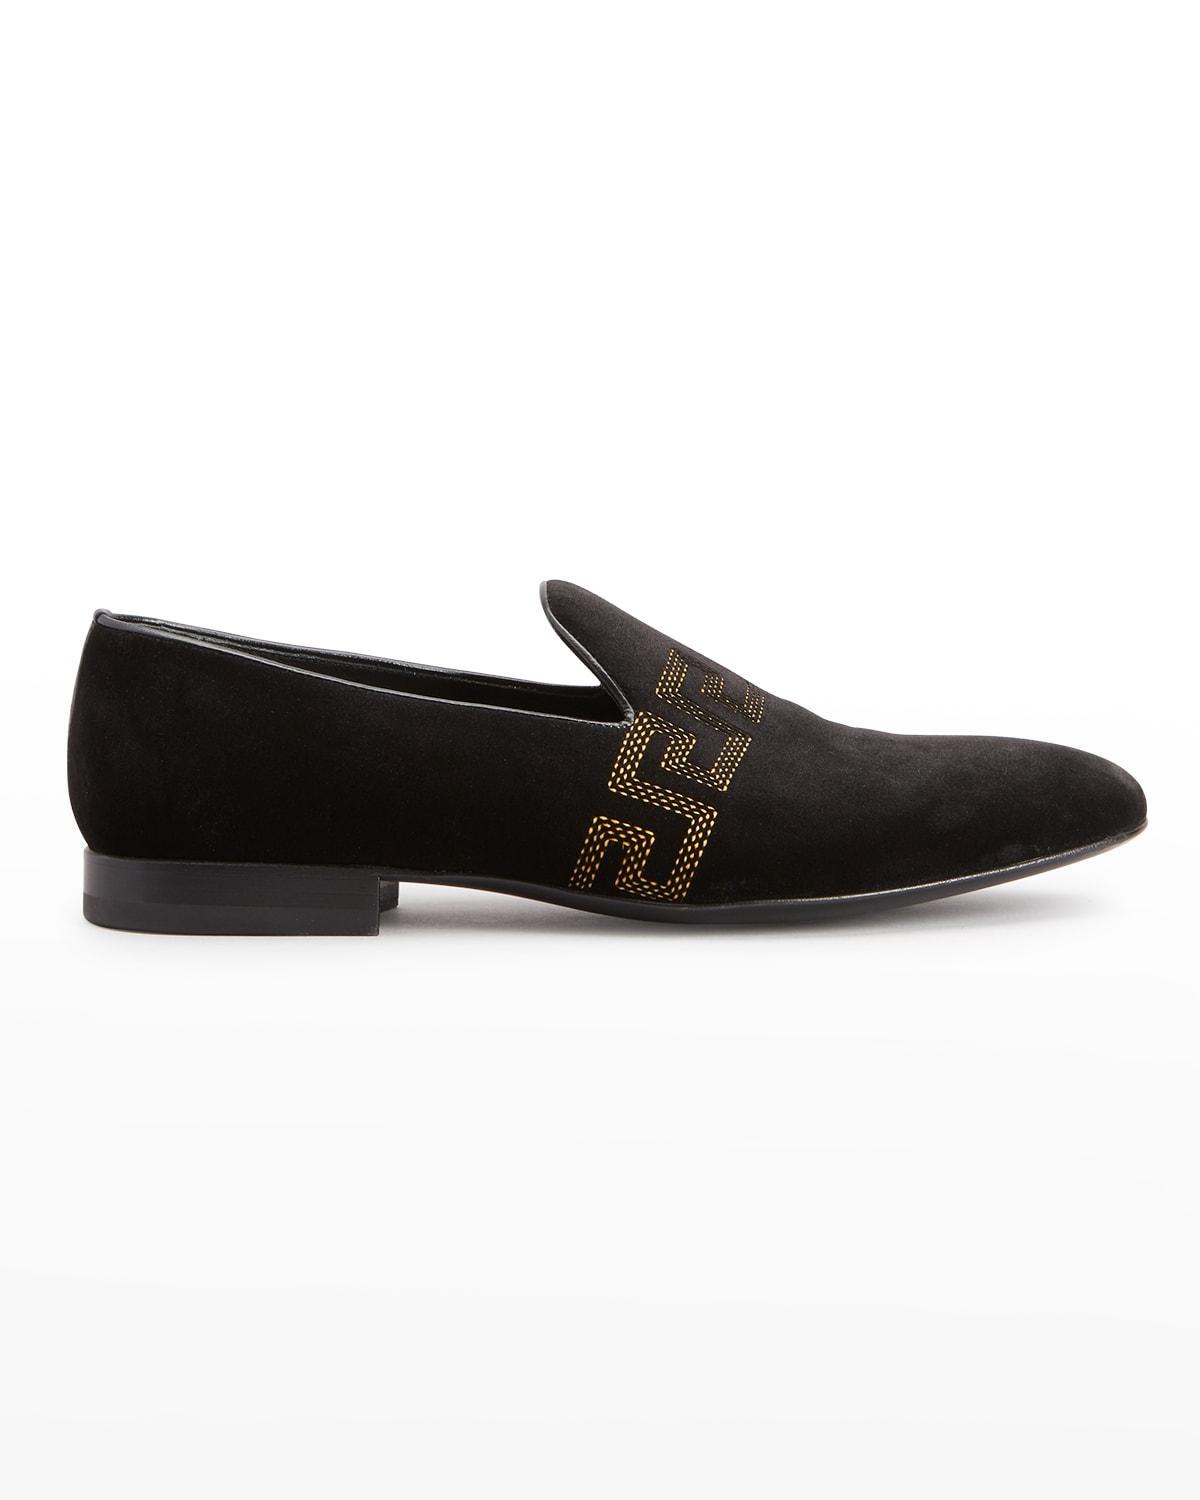 Mens Suede Venetian Loafers Product Image